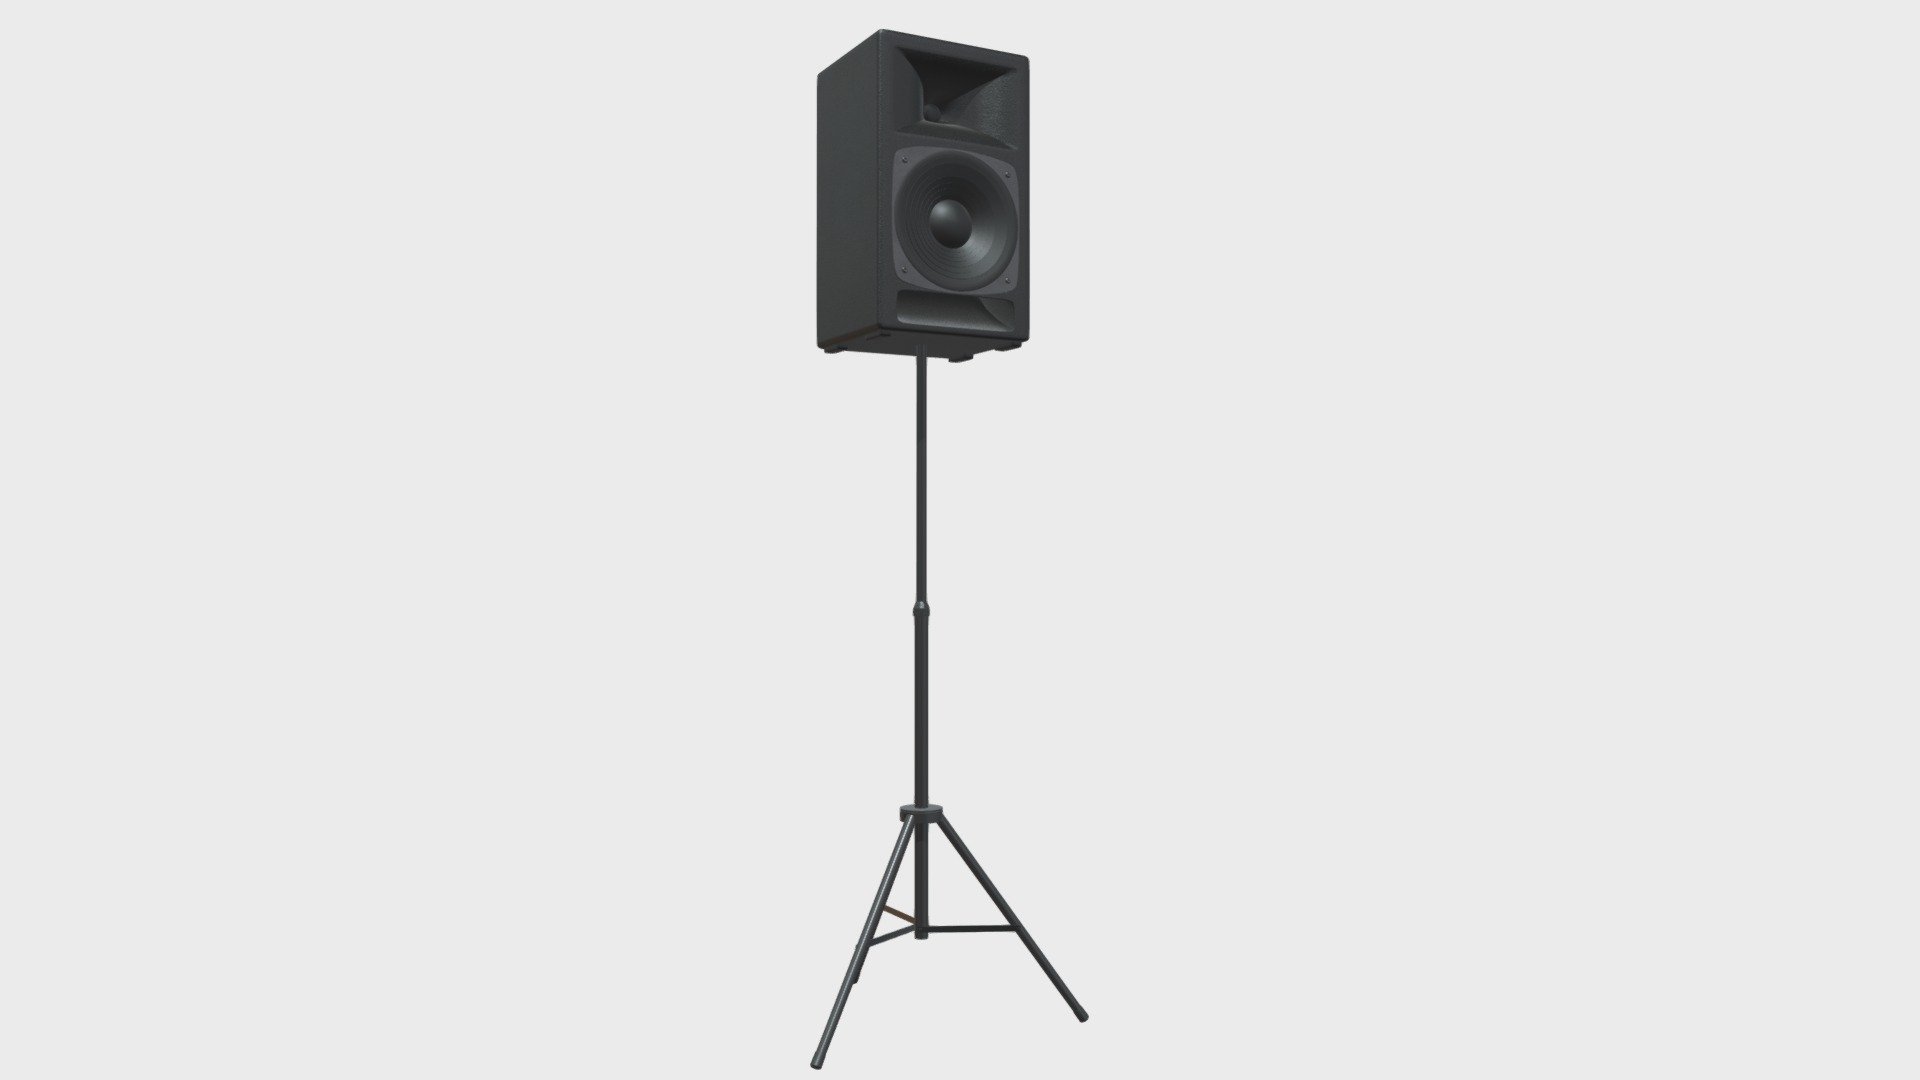 === The following description refers to the additional ZIP package provided with this model ===

2-way bass reflex loudspeaker on an extendable tripod stand 3D Model. 3 individual objects (tripod base, tripod extension, loudspeaker), sharing the same non overlapping UV Layout map, Material and PBR Textures set. Production-ready 3D Model, with PBR materials, textures, non overlapping UV Layout map provided in the package.

Quads only geometries (no tris/ngons).

Formats included: FBX, OBJ; scenes: BLEND (with Cycles / Eevee PBR Materials and Textures); other: png with Alpha.

3 Objects (meshes), 1 PBR Material, UV unwrapped (non overlapping UV Layout map provided in the package); UV-mapped Textures.

UV Layout maps and Image Textures resolutions: 2048x2048; PBR Textures made with Substance Painter.

Polygonal, QUADS ONLY (no tris/ngons); 61825 vertices, 60688 quad faces (121376 tris).

Real world dimensions; scene scale units: cm in Blender 3.1 (that is: Metric with 0.01 scale) 3d model